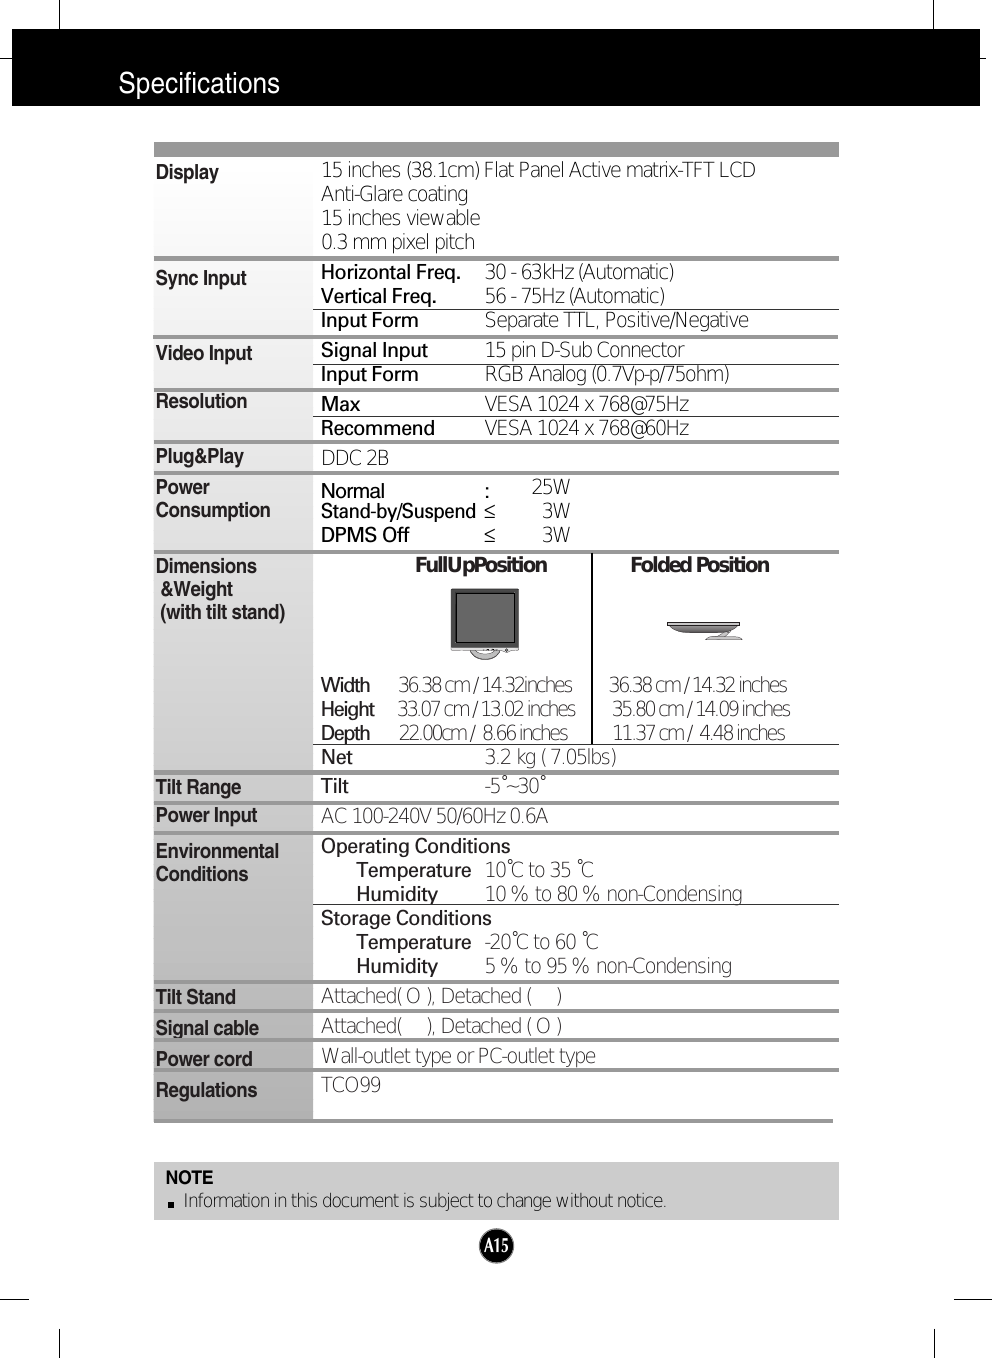 A15SpecificationsNOTEInformation in this document is subject to change without notice.15 inches (38.1cm) Flat Panel Active matrix-TFT LCD Anti-Glare coating15 inches viewable0.3 mm pixel pitchHorizontal Freq. 30 - 63kHz (Automatic)Vertical Freq. 56 - 75Hz (Automatic)Input Form Separate TTL, Positive/NegativeSignal Input 15 pin D-Sub ConnectorInput Form RGB Analog (0.7Vp-p/75ohm)Max VESA 1024 x 768@75Hz Recommend VESA 1024 x 768@60HzDDC 2BNormal :25WStand-by/Suspend≤3WDPMS Off ≤3WFullUpPosition                 Folded PositionWidth   36.38 cm / 14.32inches         36.38 cm / 14.32 inchesHeight   33.07 cm / 13.02 inches         35.80 cm / 14.09 inchesDepth  22.00cm /  8.66 inches           11.37 cm /  4.48 inchesNet 3.2 kg ( 7.05lbs)Tilt -5˚~30˚AC 100-240V 50/60Hz 0.6AOperating ConditionsTemperature 10˚C to 35 ˚CHumidity 10 % to 80 % non-CondensingStorage ConditionsTemperature -20˚C to 60 ˚CHumidity 5 % to 95 % non-CondensingAttached( O ), Detached (     )Attached(     ), Detached ( O )Wall-outlet type or PC-outlet typeTCO99DisplaySync InputVideo InputResolutionPlug&amp;PlayPowerConsumptionDimensions&amp;Weight(with tilt stand)Tilt RangePower InputEnvironmentalConditionsTilt StandSignal cablePower cord Regulations